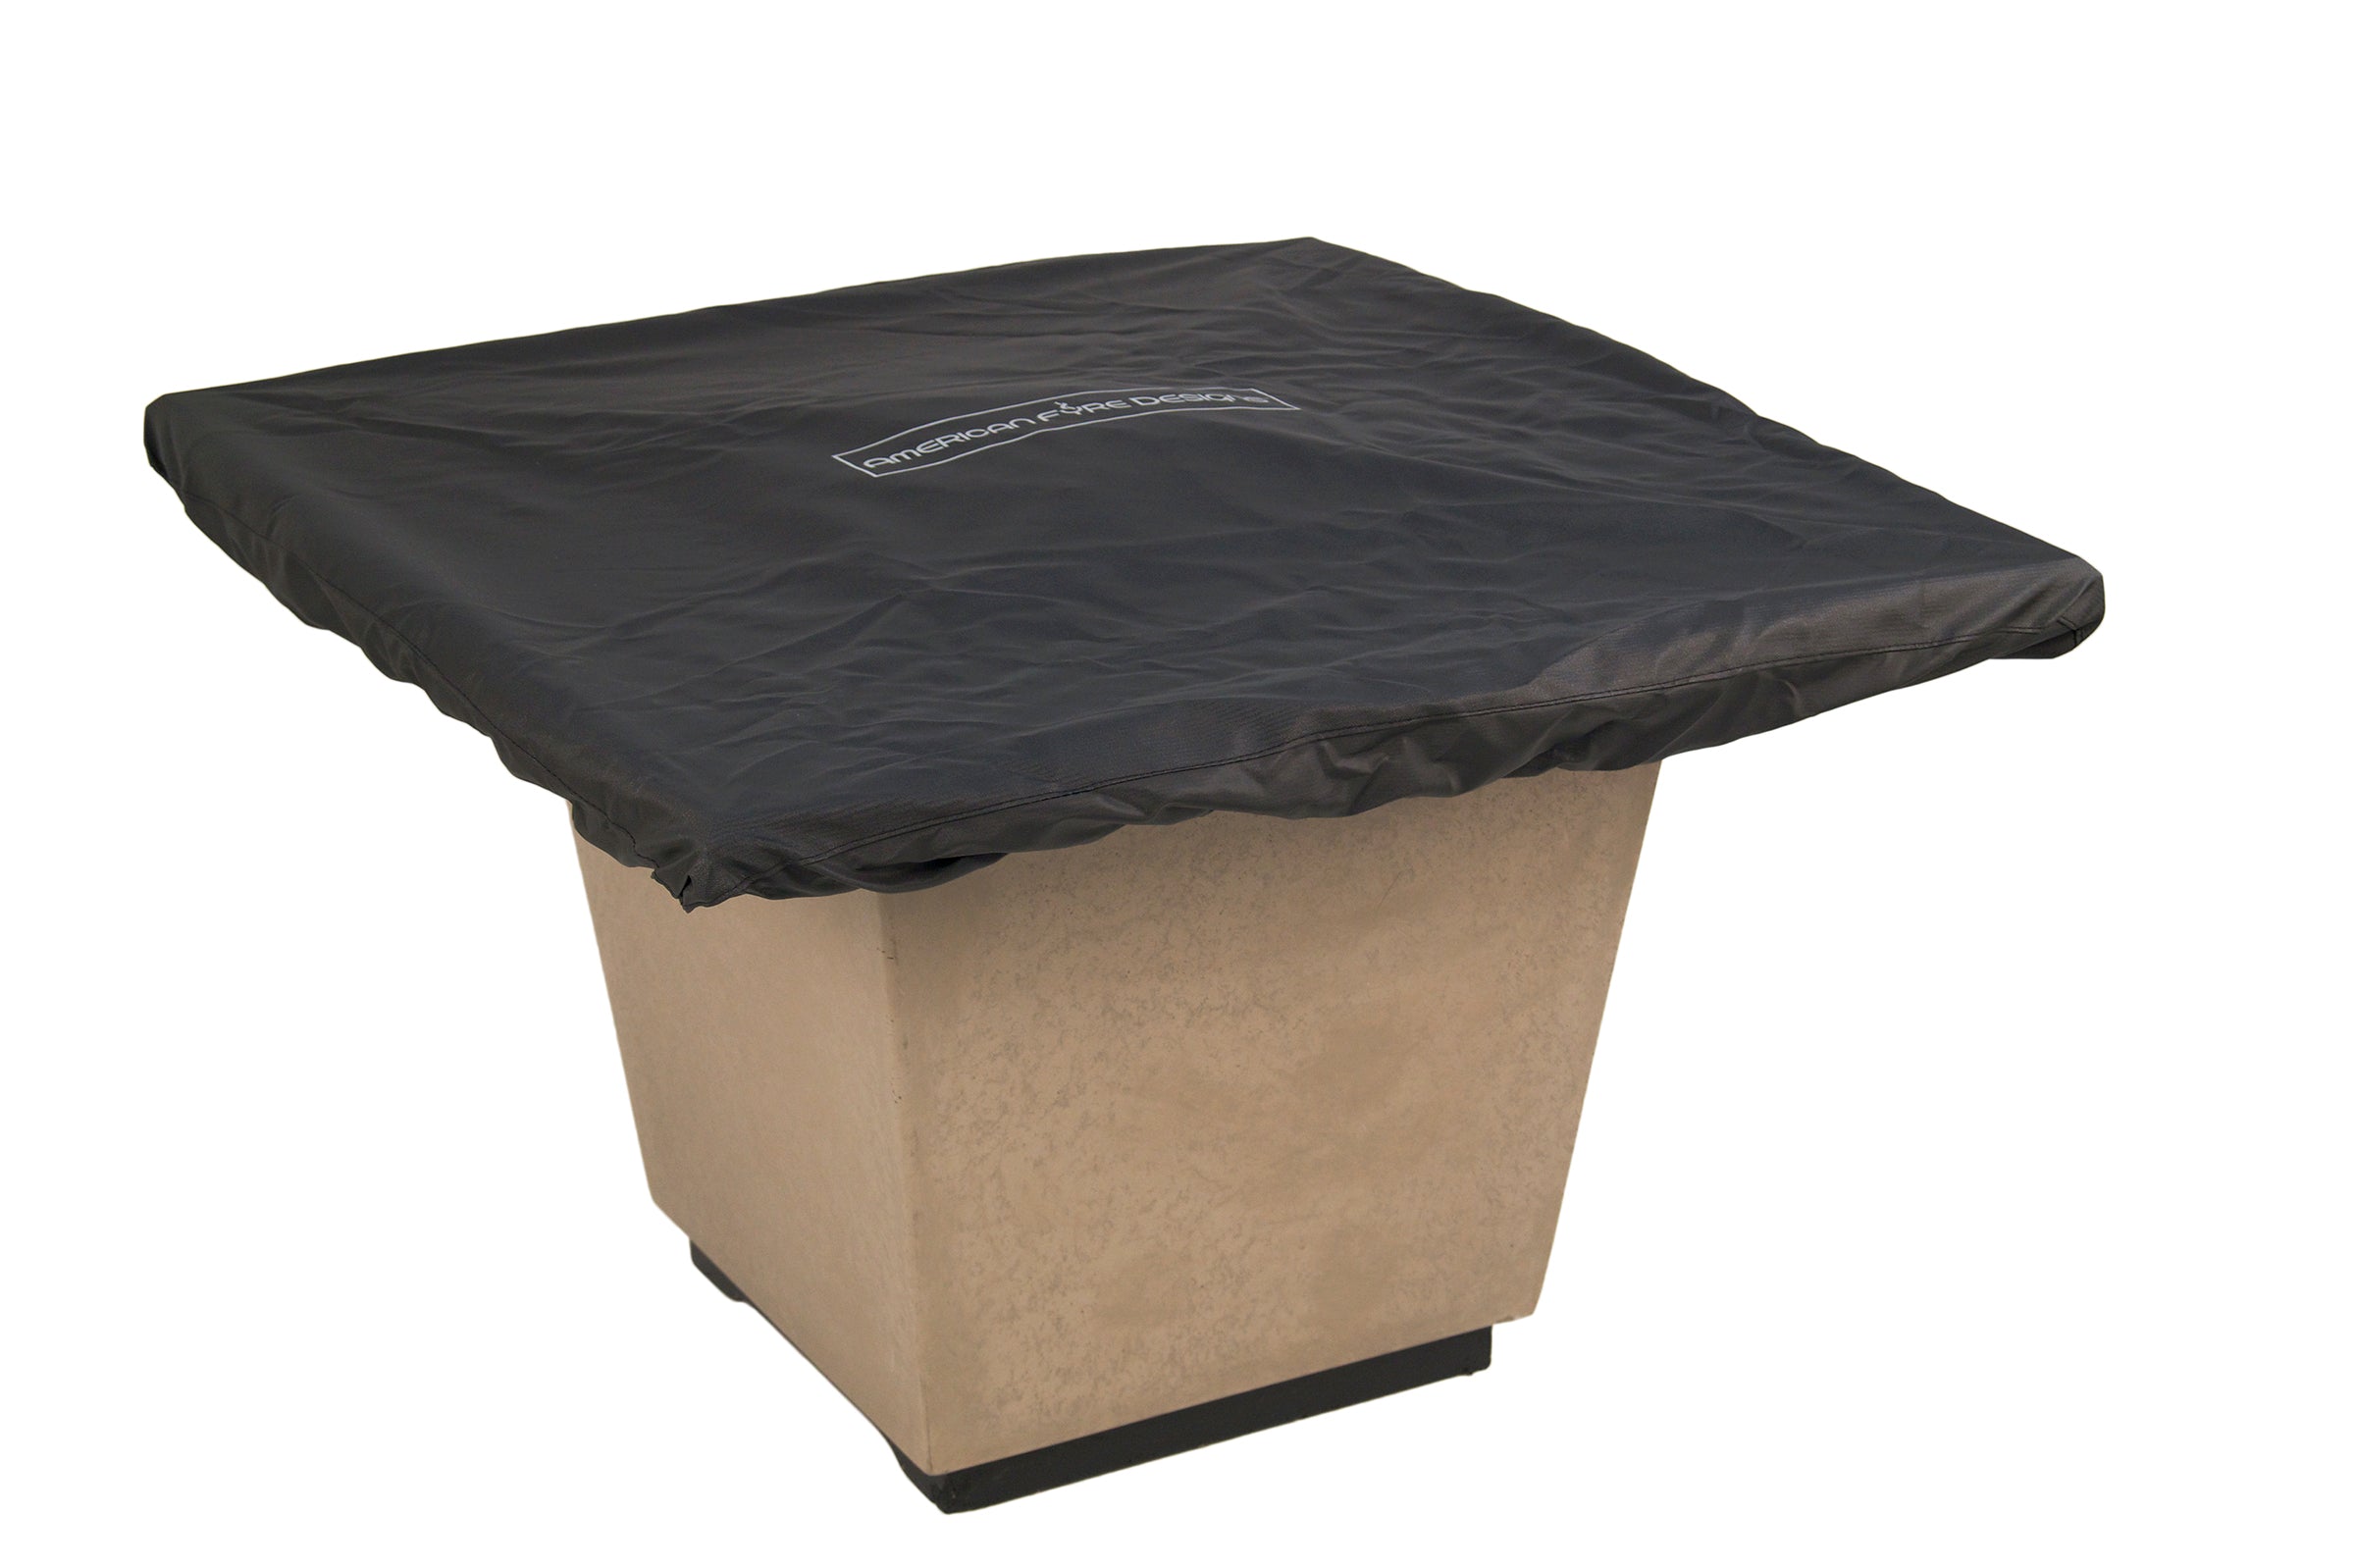 36" Square Firetable Fabric Cover by American Fyre Design